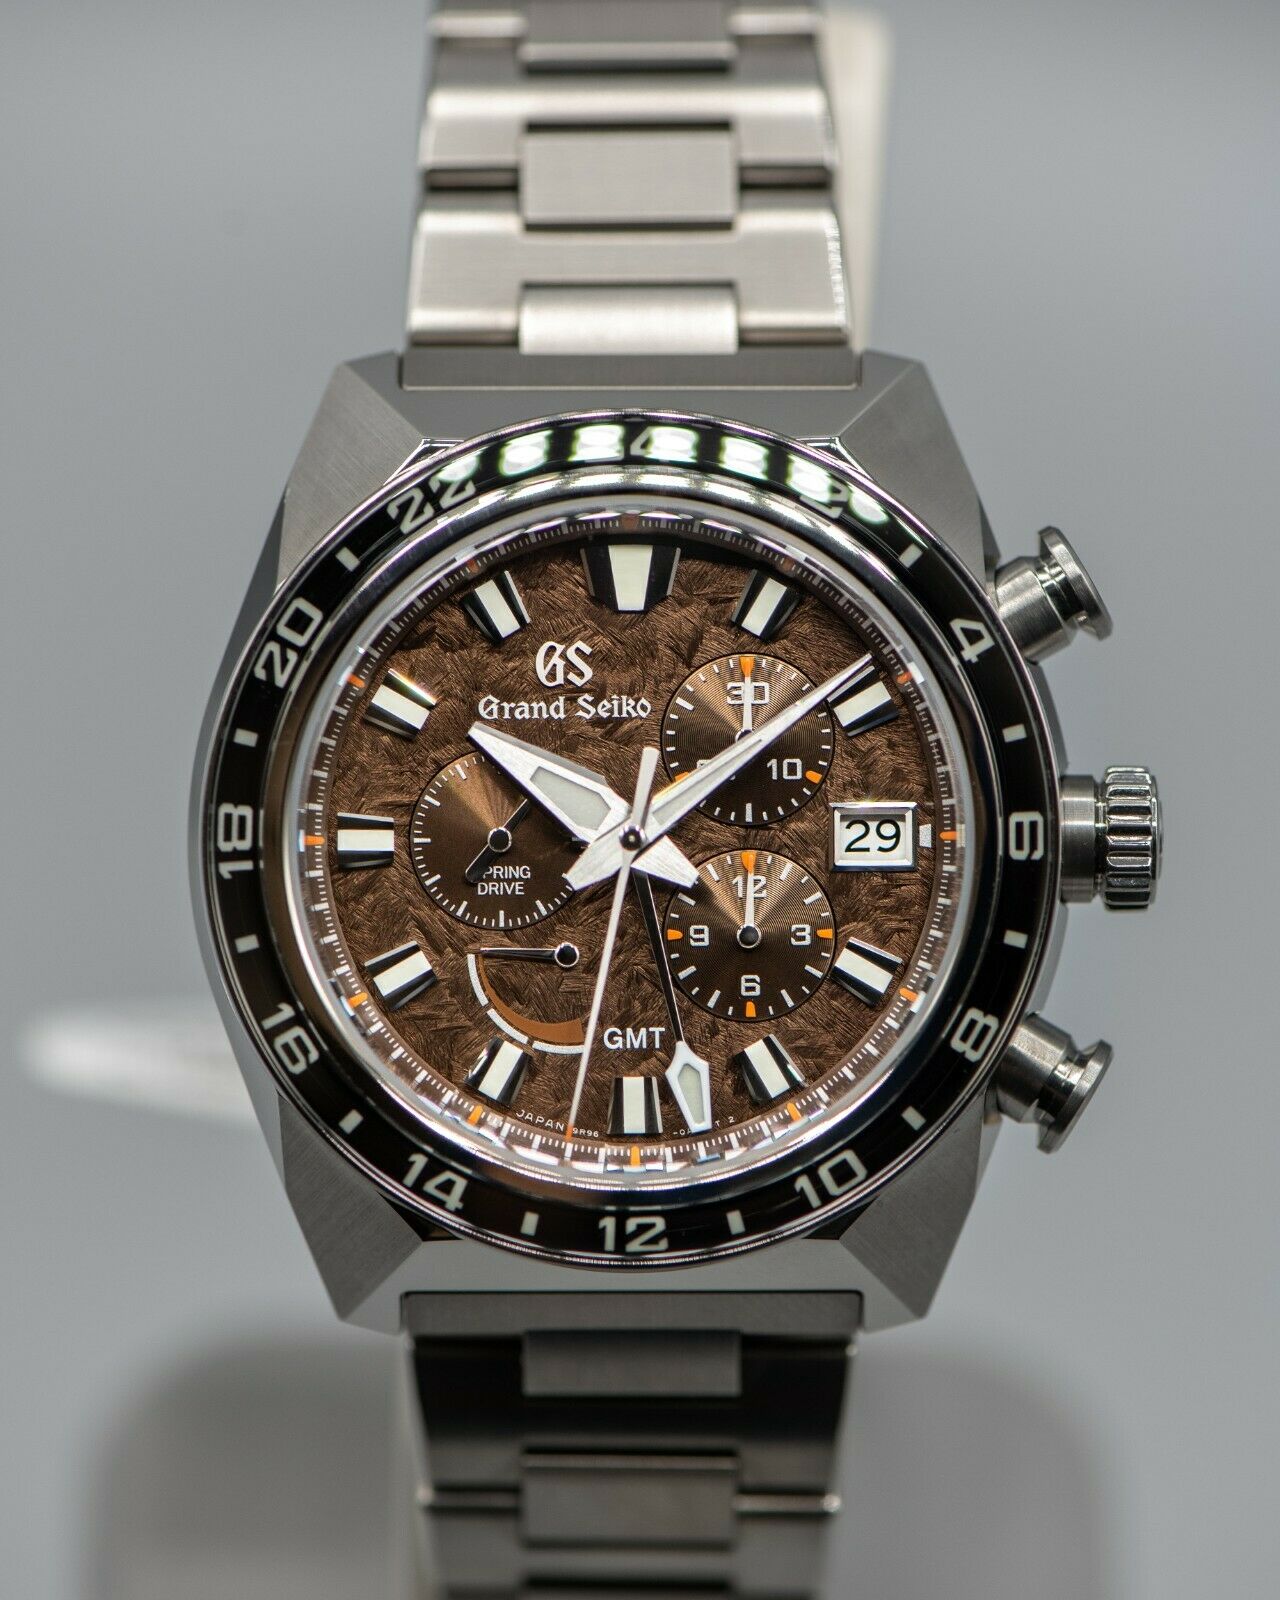 FS: Pre-Owned Grand Seiko SBGC231 Titanium Chronograph - 100% Complete! |  WatchUSeek Watch Forums